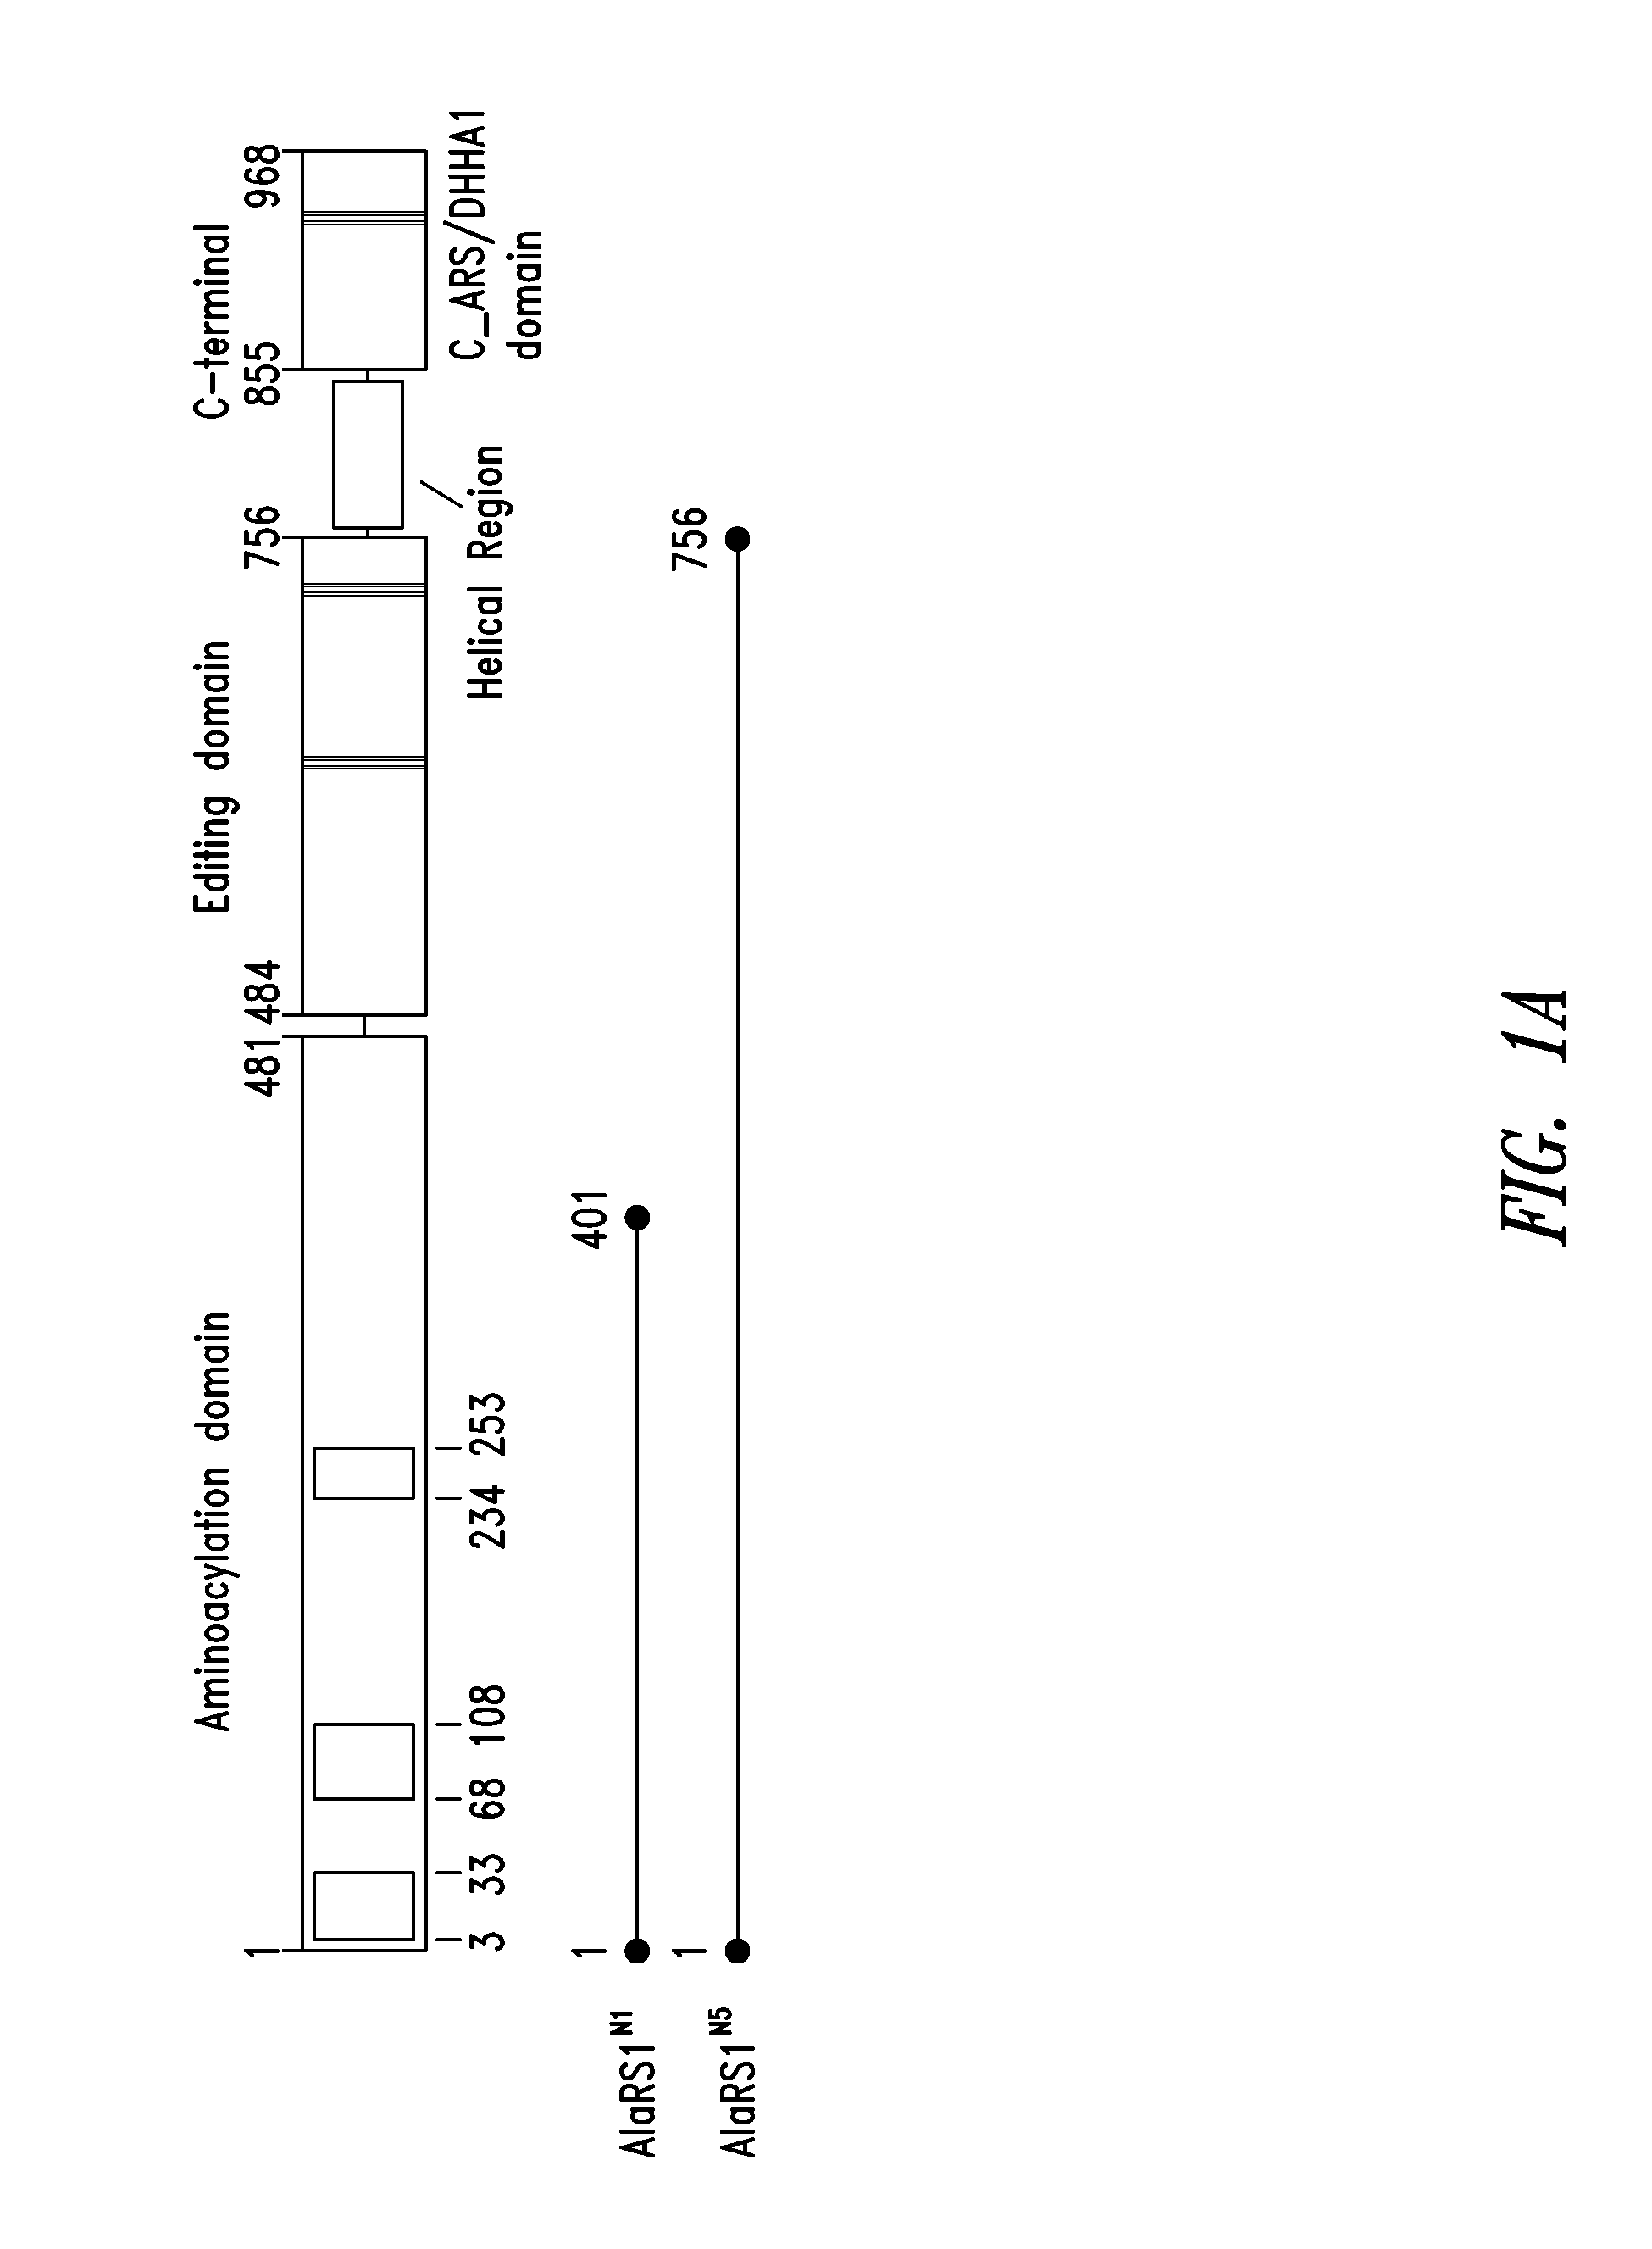 Innovative discovery of therapeutic, diagnostic, and antibody compositions related to protein fragments of alanyl-trna synthetases